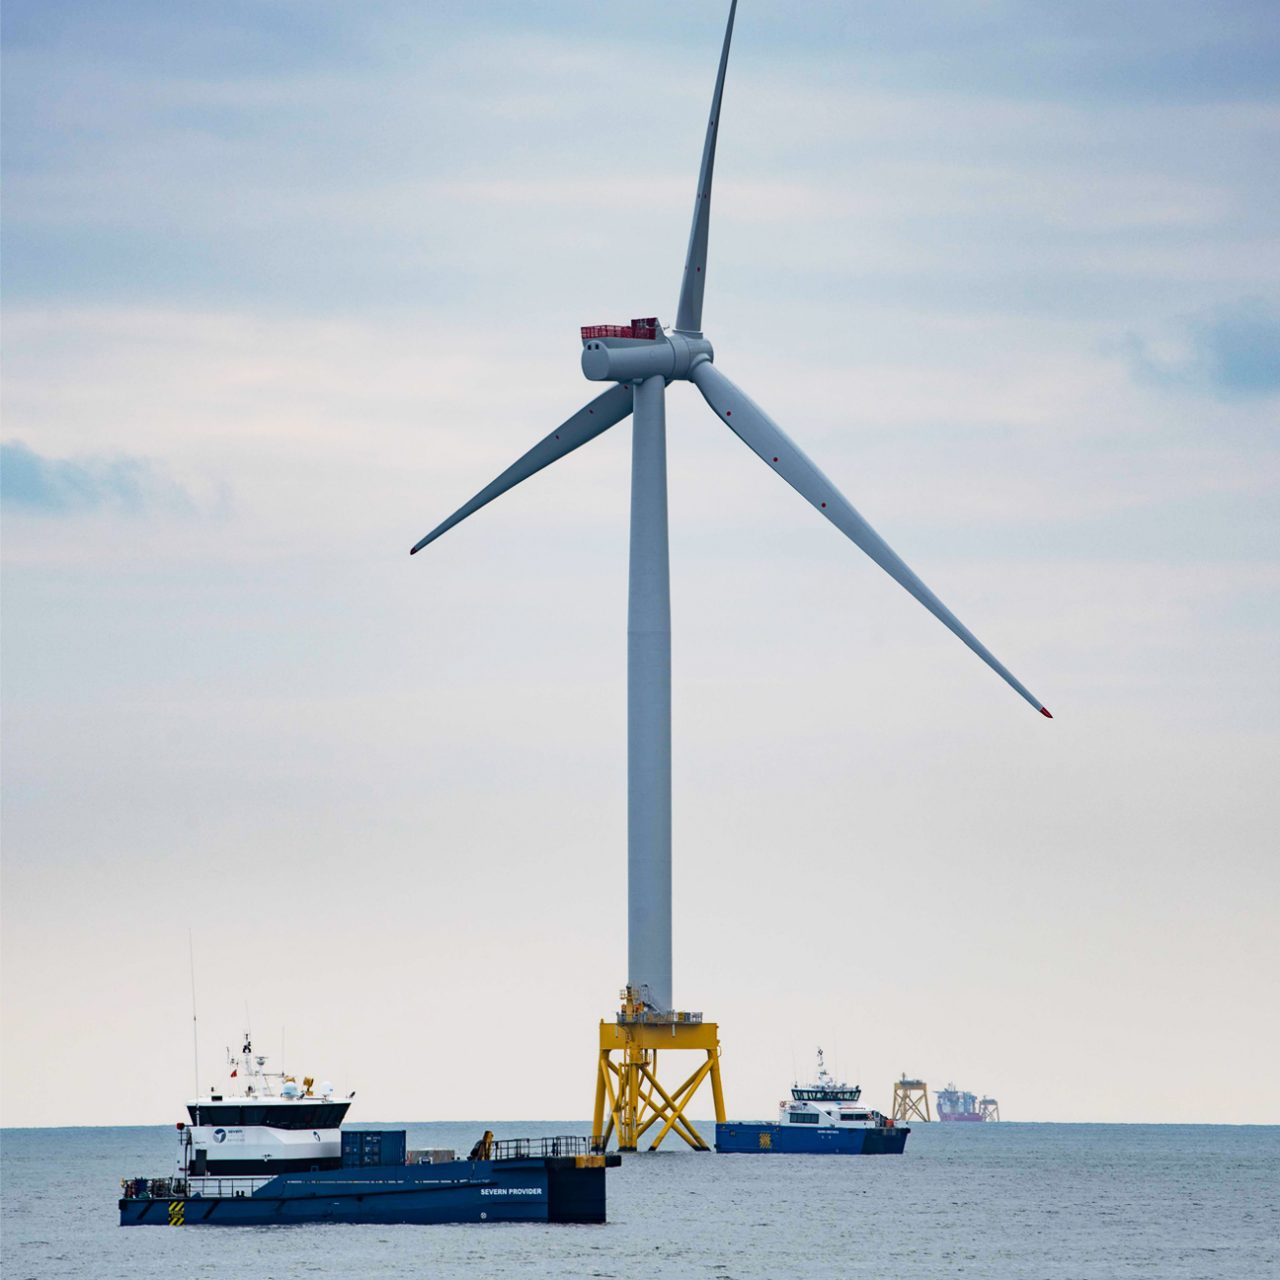 Offshore wind turbine with boat in foreground